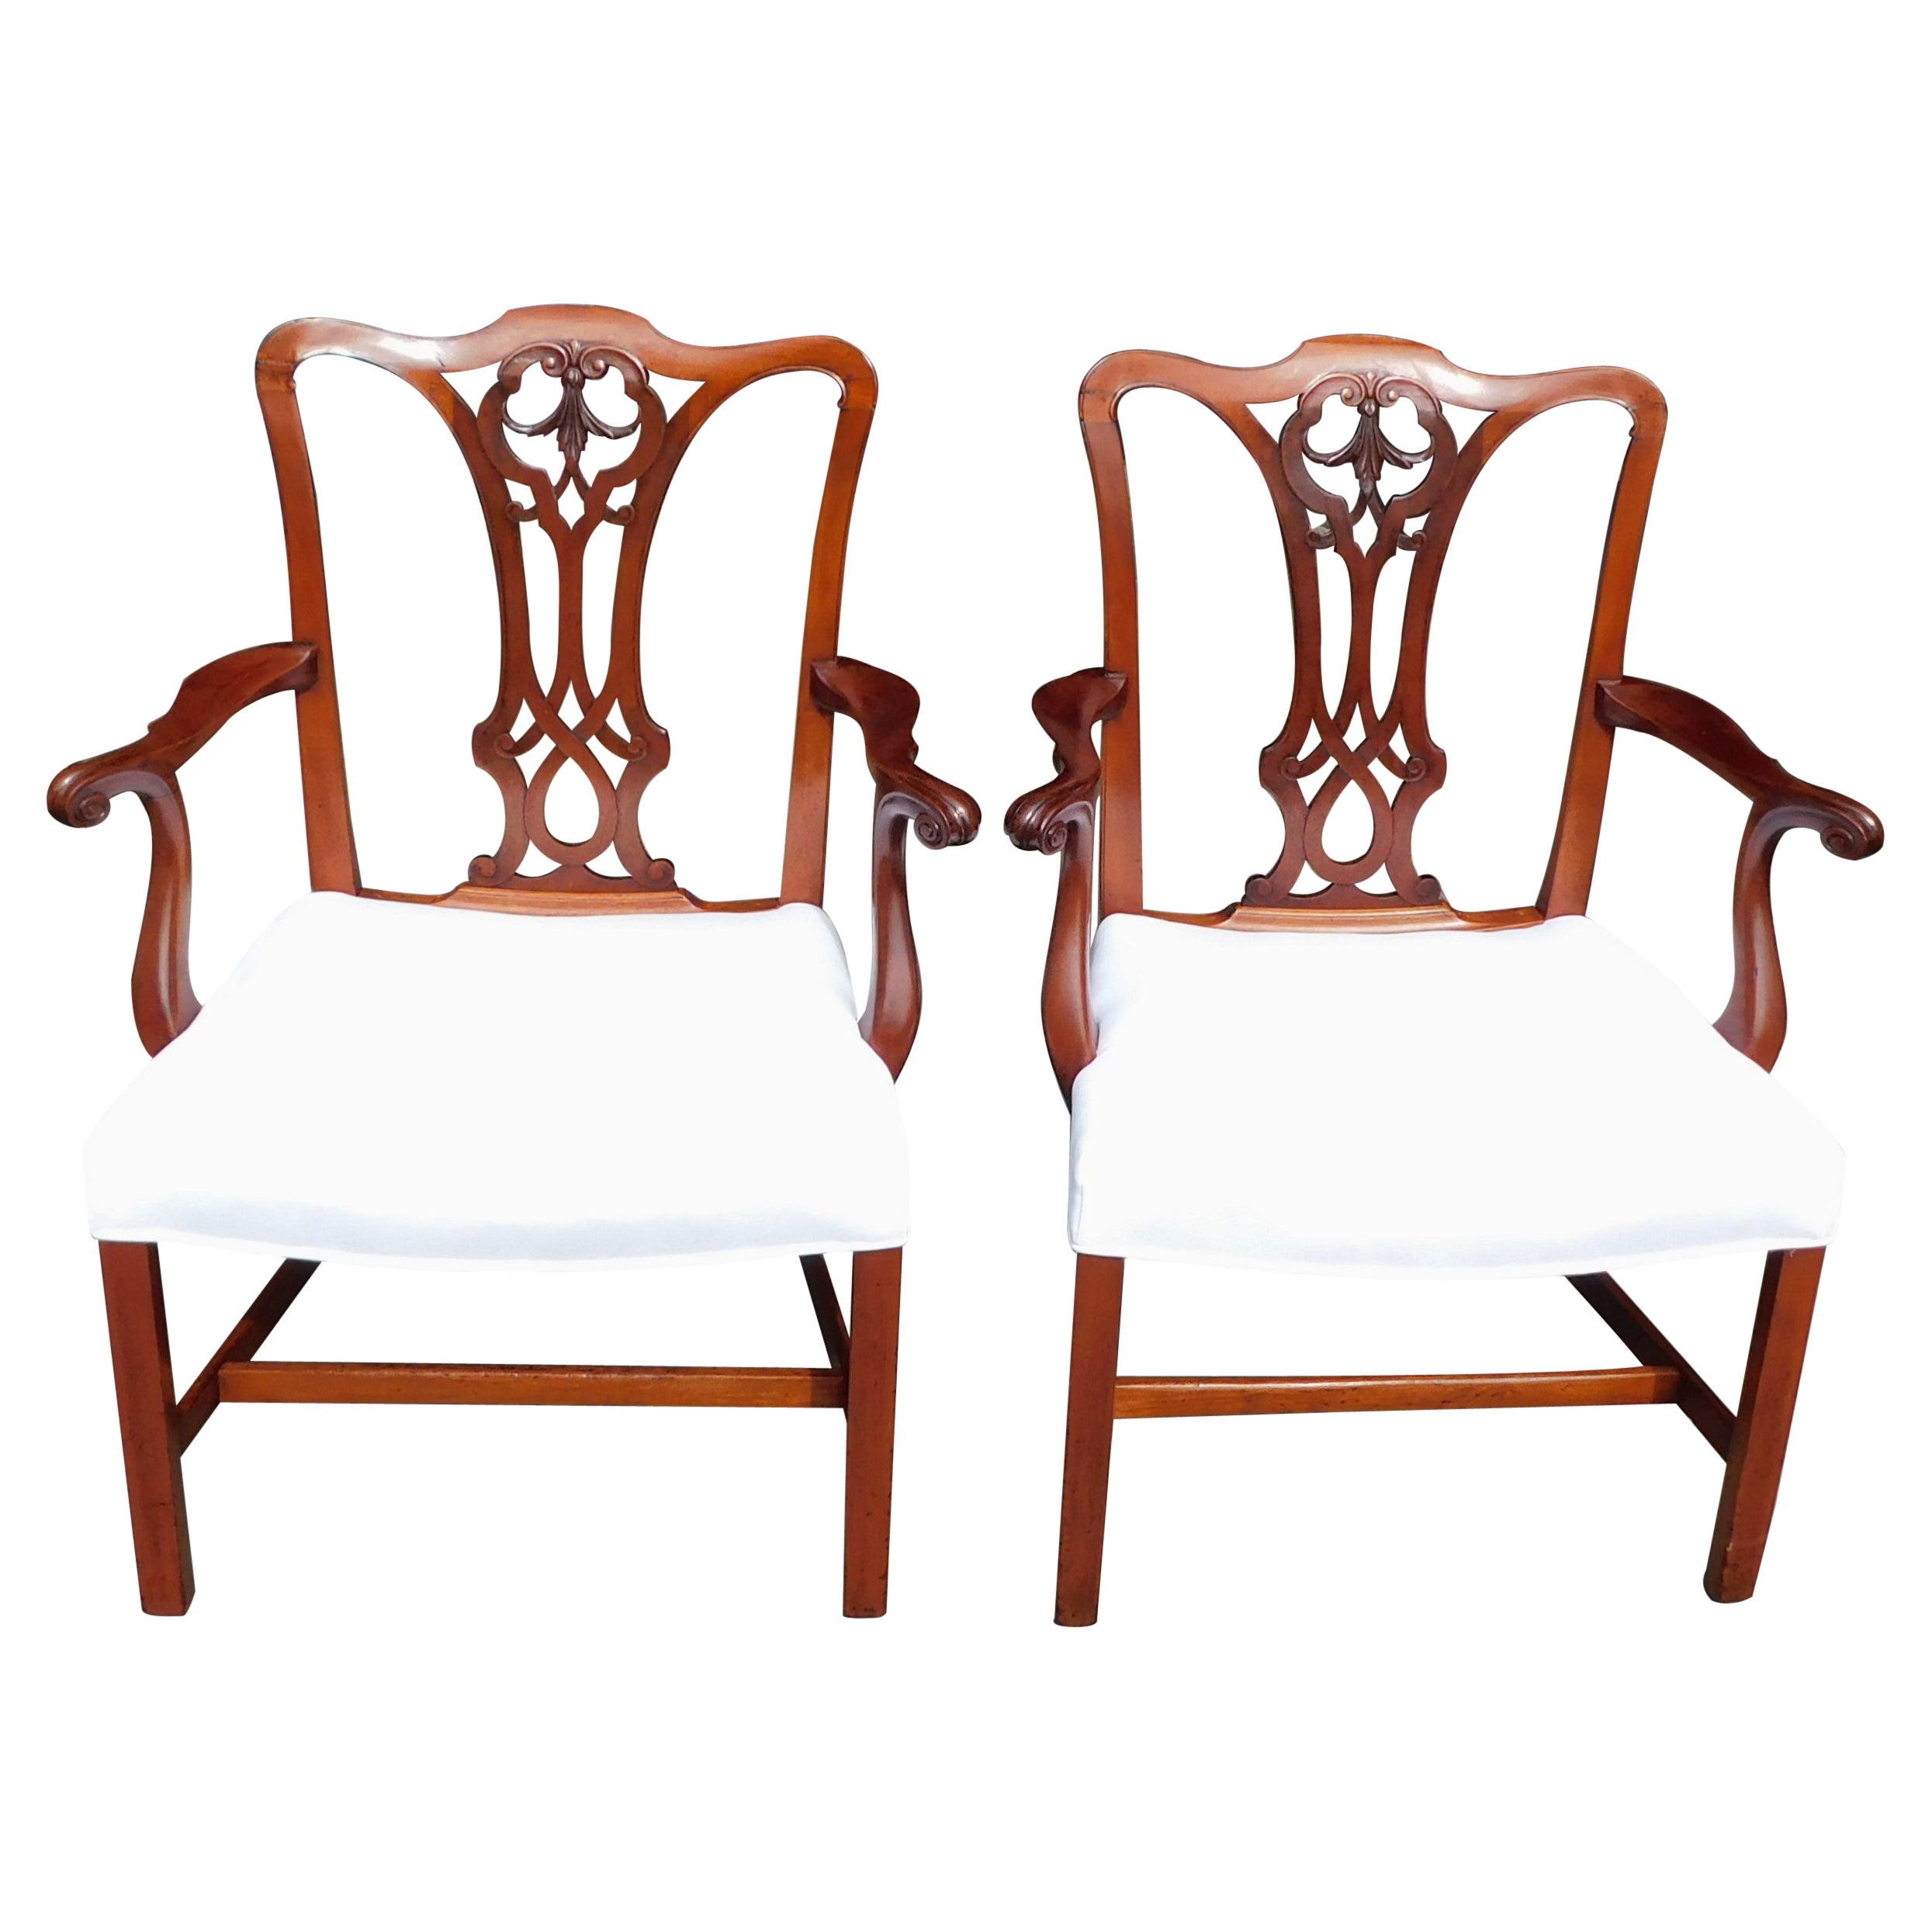 Pair of English Mahogany Serpentine Crest Arm Chairs with Saddle Seats, C. 1820 For Sale